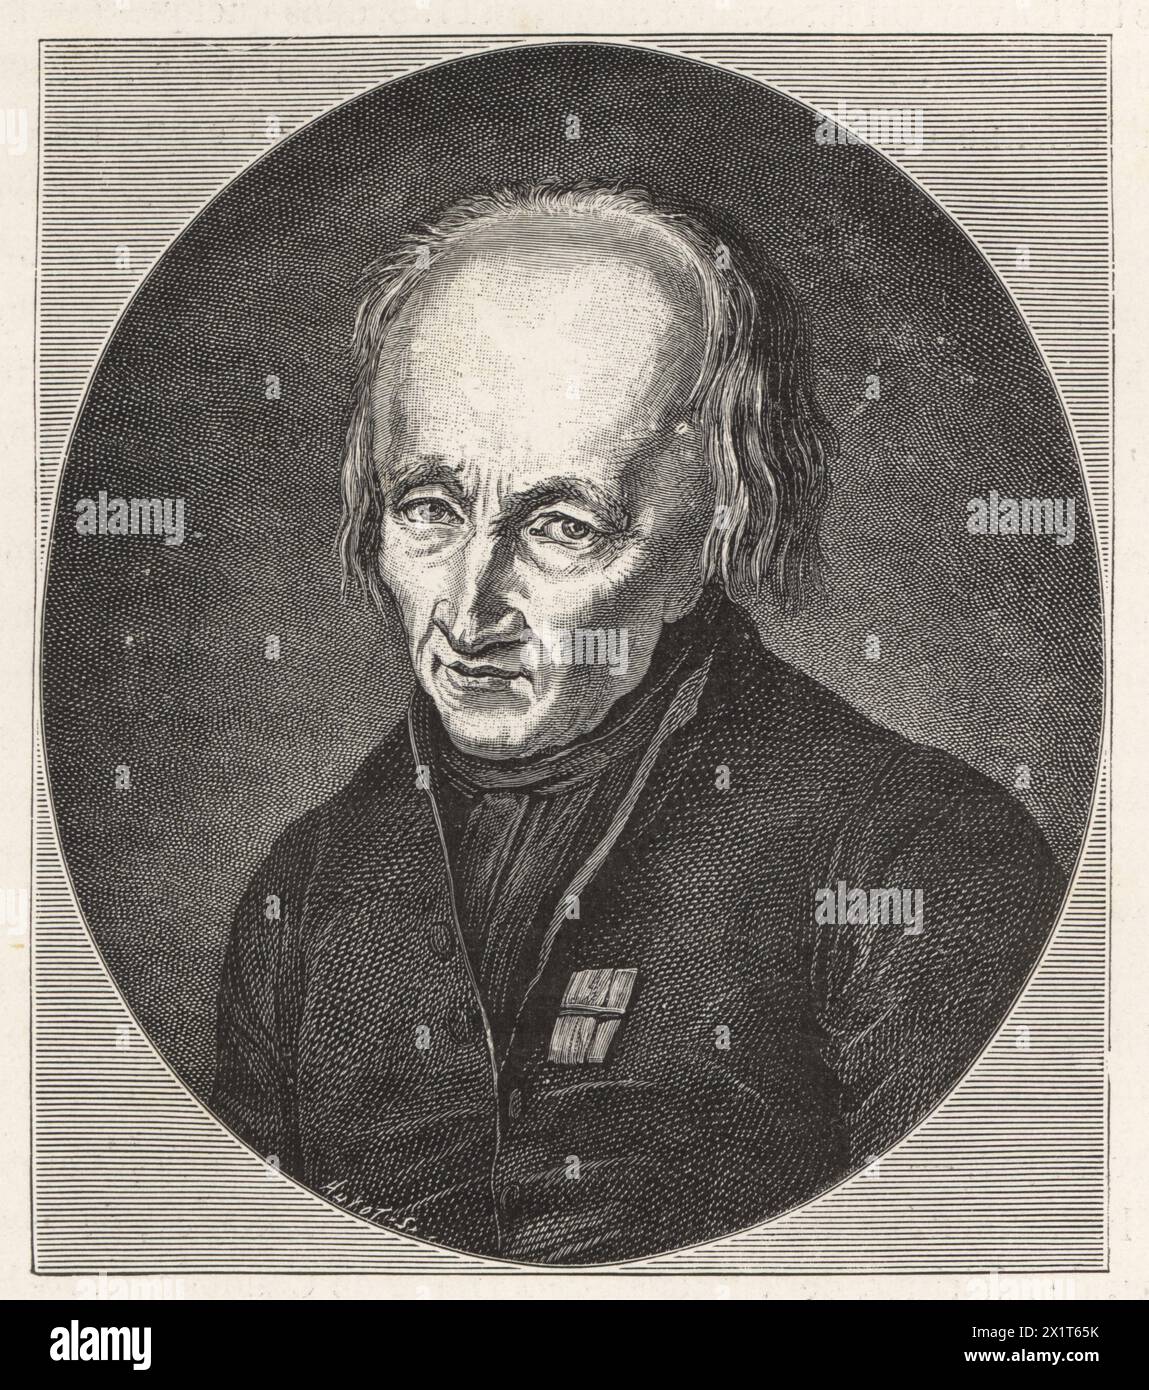 René Just Haüy, known as Abbé Haüy, French priest and mineralogist, professor at the Museum of Natural History, 1743-1822. Woodcut by Huyot after a portrait by Philibert-Louis Debucourt from Paul Lacroix's Directoire, Consulat et Empire, (Directory, Consulate and Empire), Paris, 1884. Stock Photo